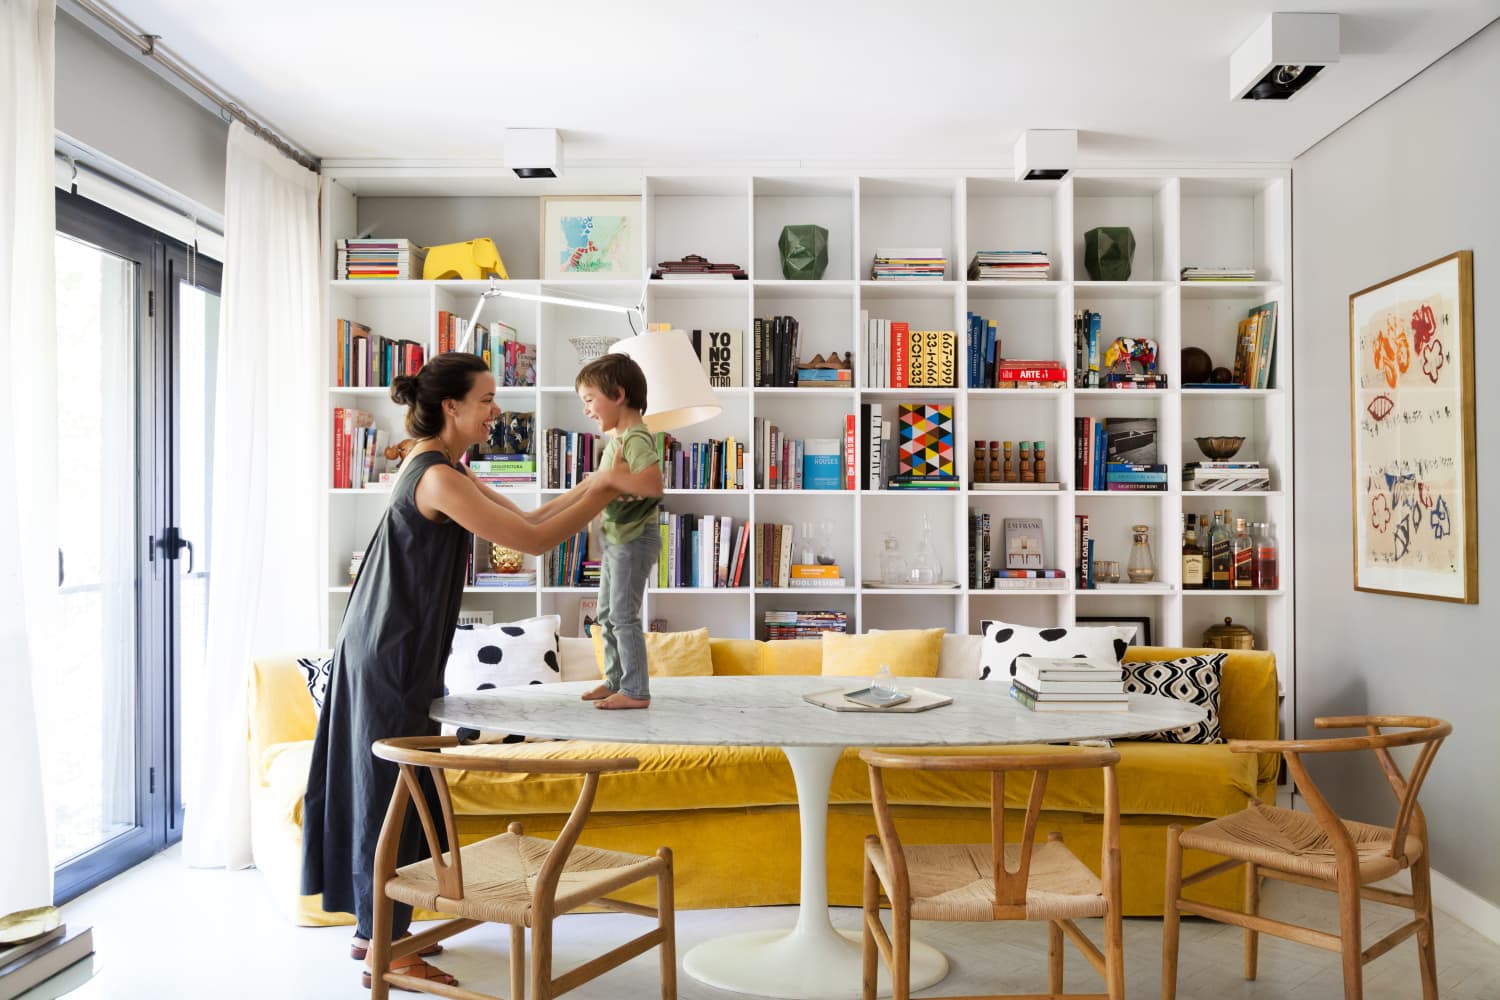 8 Must-Know Cleaning Tips from Busy Parents that’ll Make Life Easier